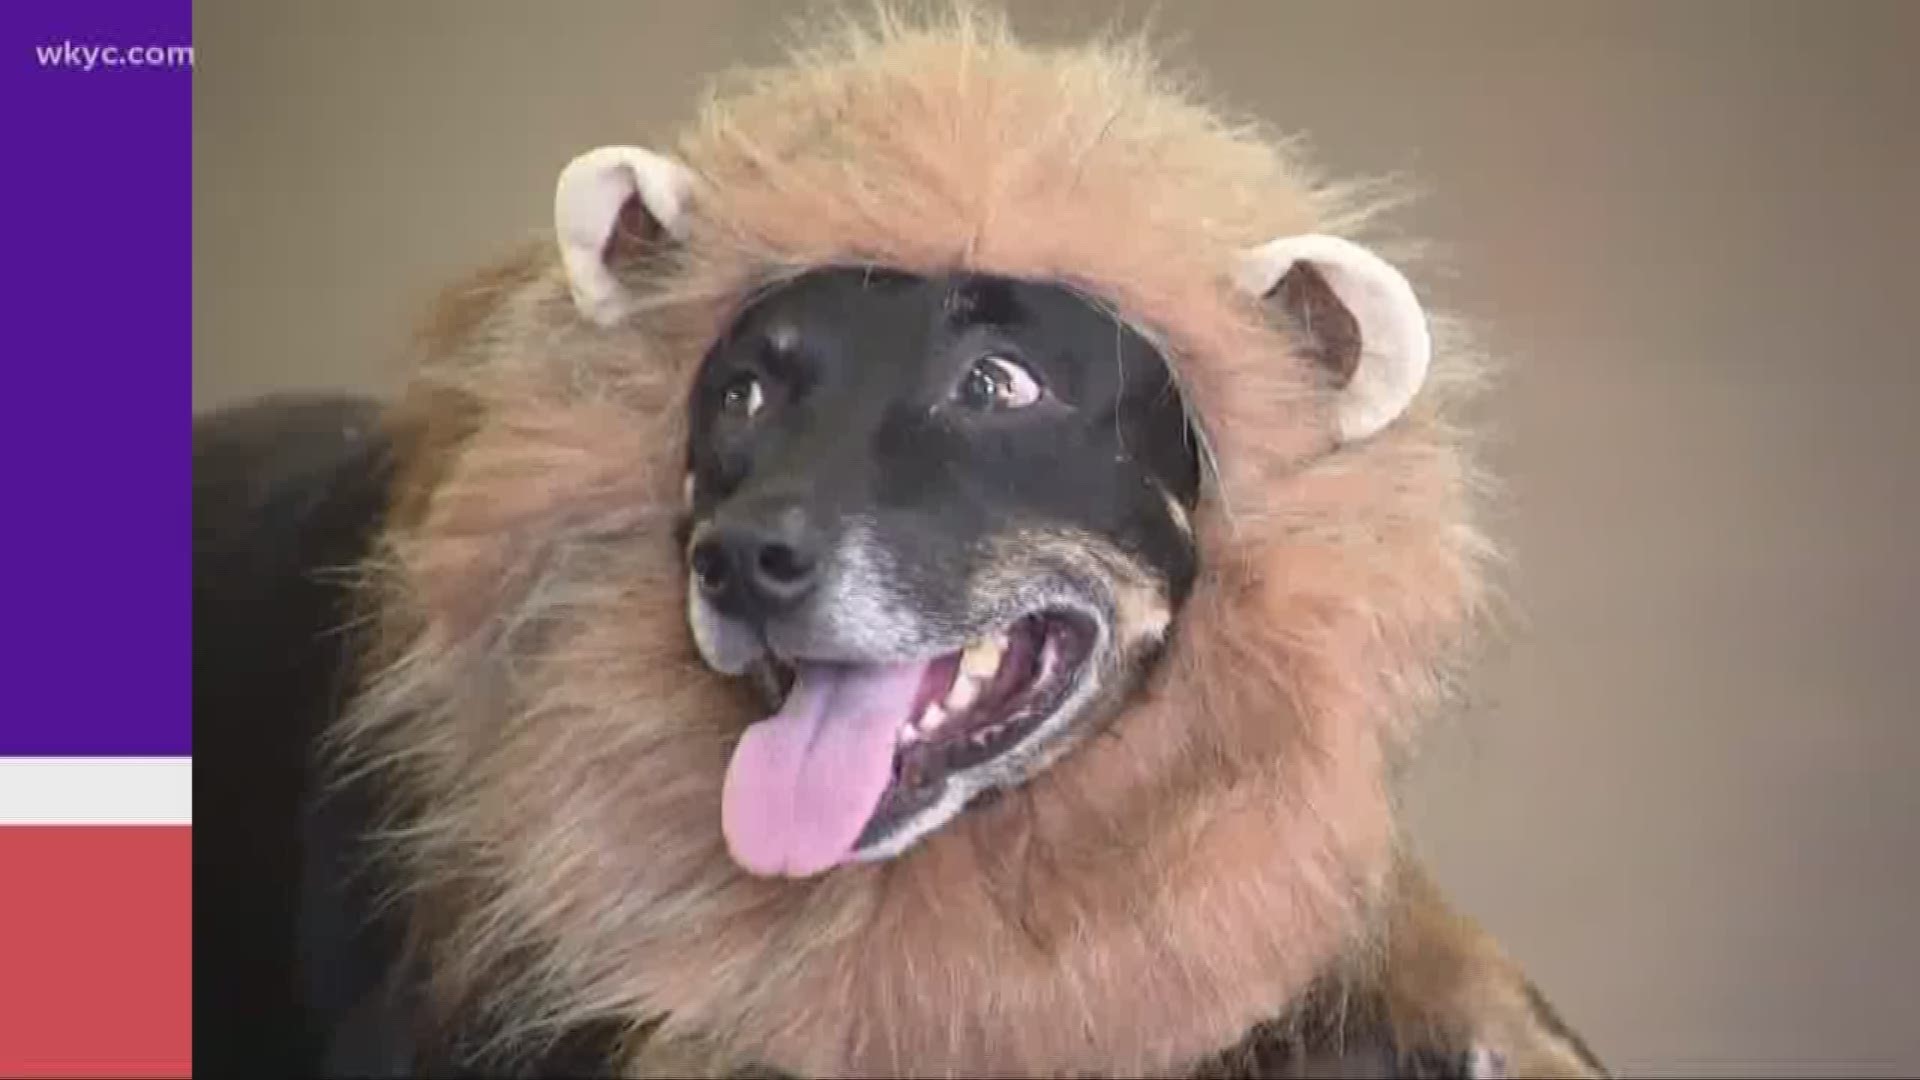 Oct. 1, 2019: Americans spend approximately $500,000,000 a year on Halloween costumes for their pets, according to the National Retail Federation.